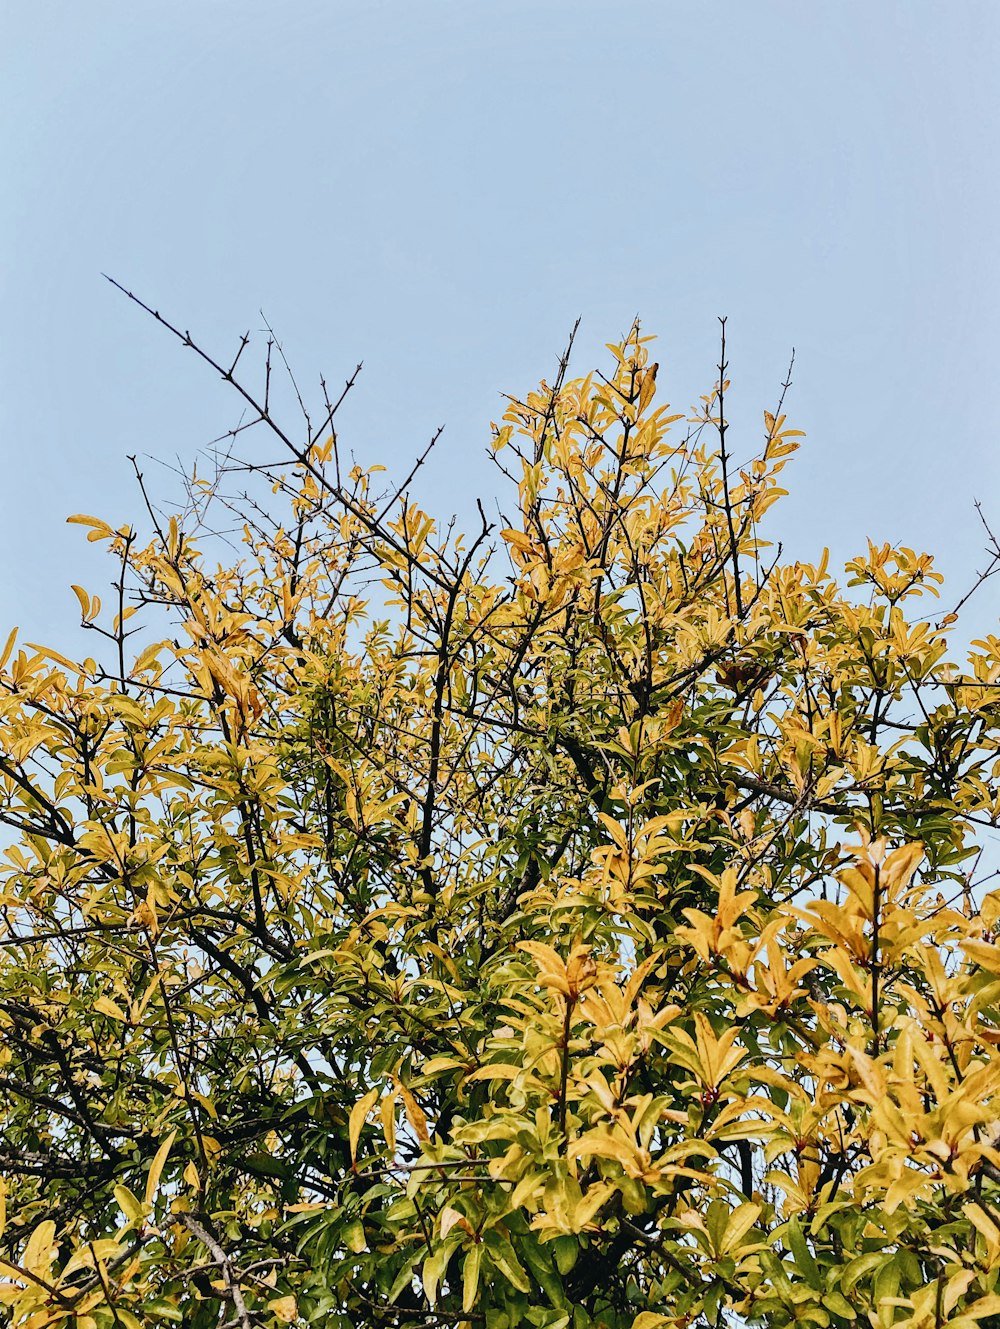 green and yellow leaves under blue sky during daytime